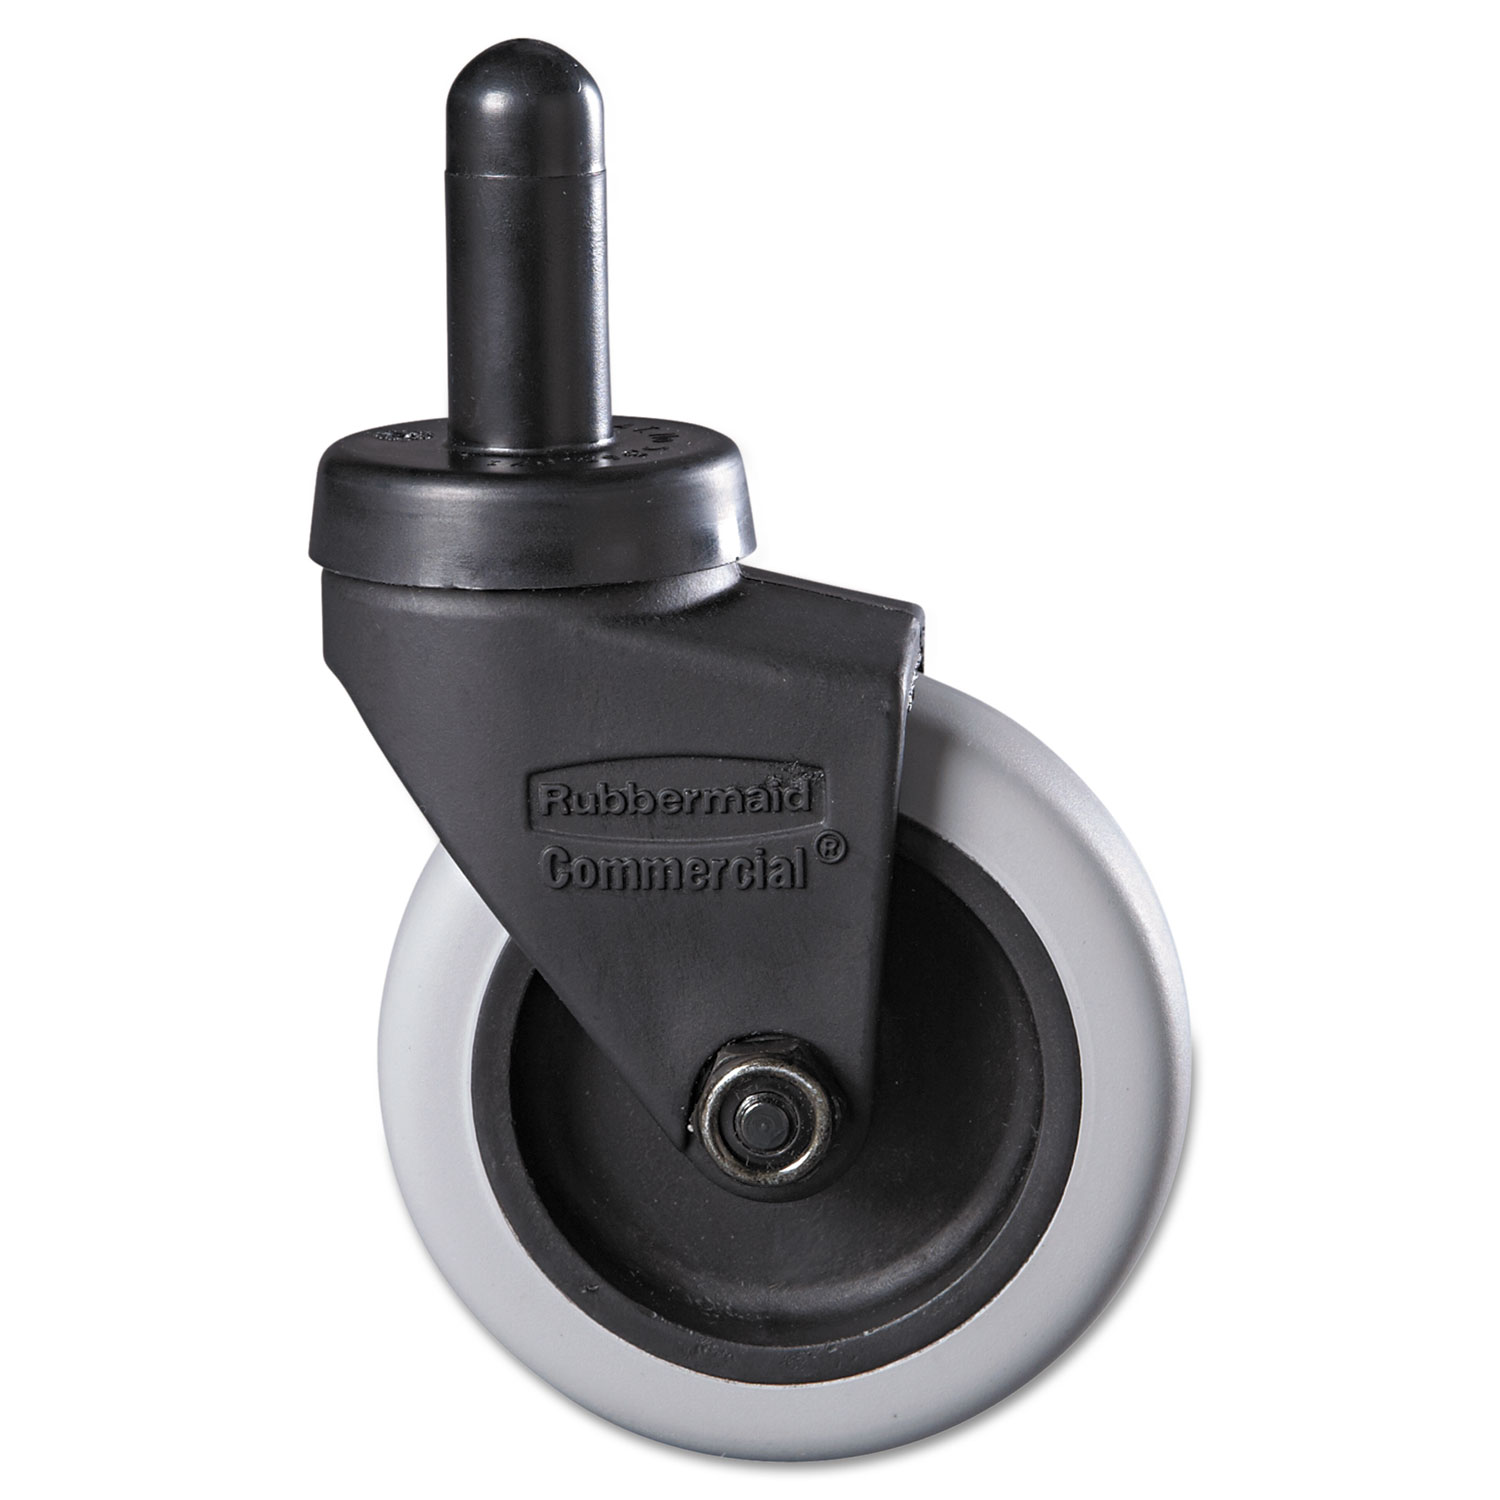 Replacement Swivel Bayonet Casters by Rubbermaid mercial